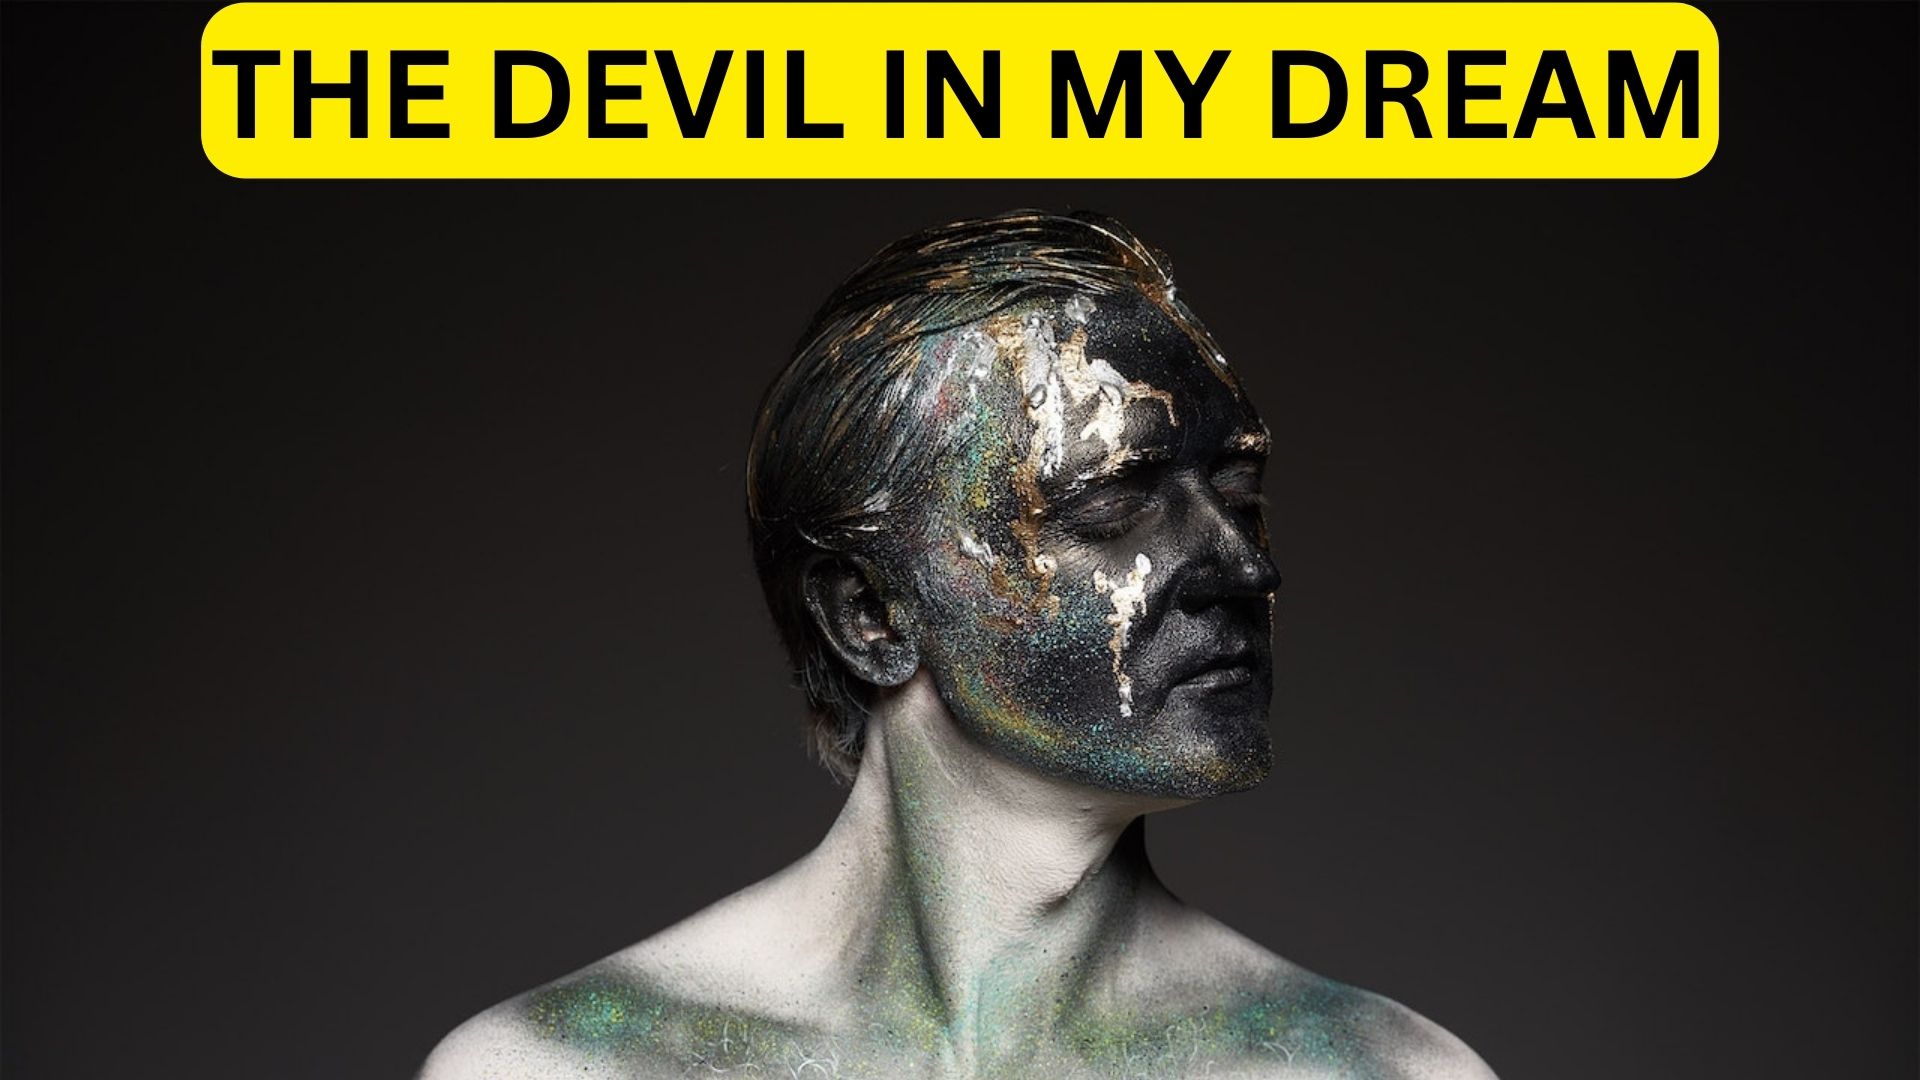 The Devil In My Dream - A Warning Sign Of Your Potential Attitude